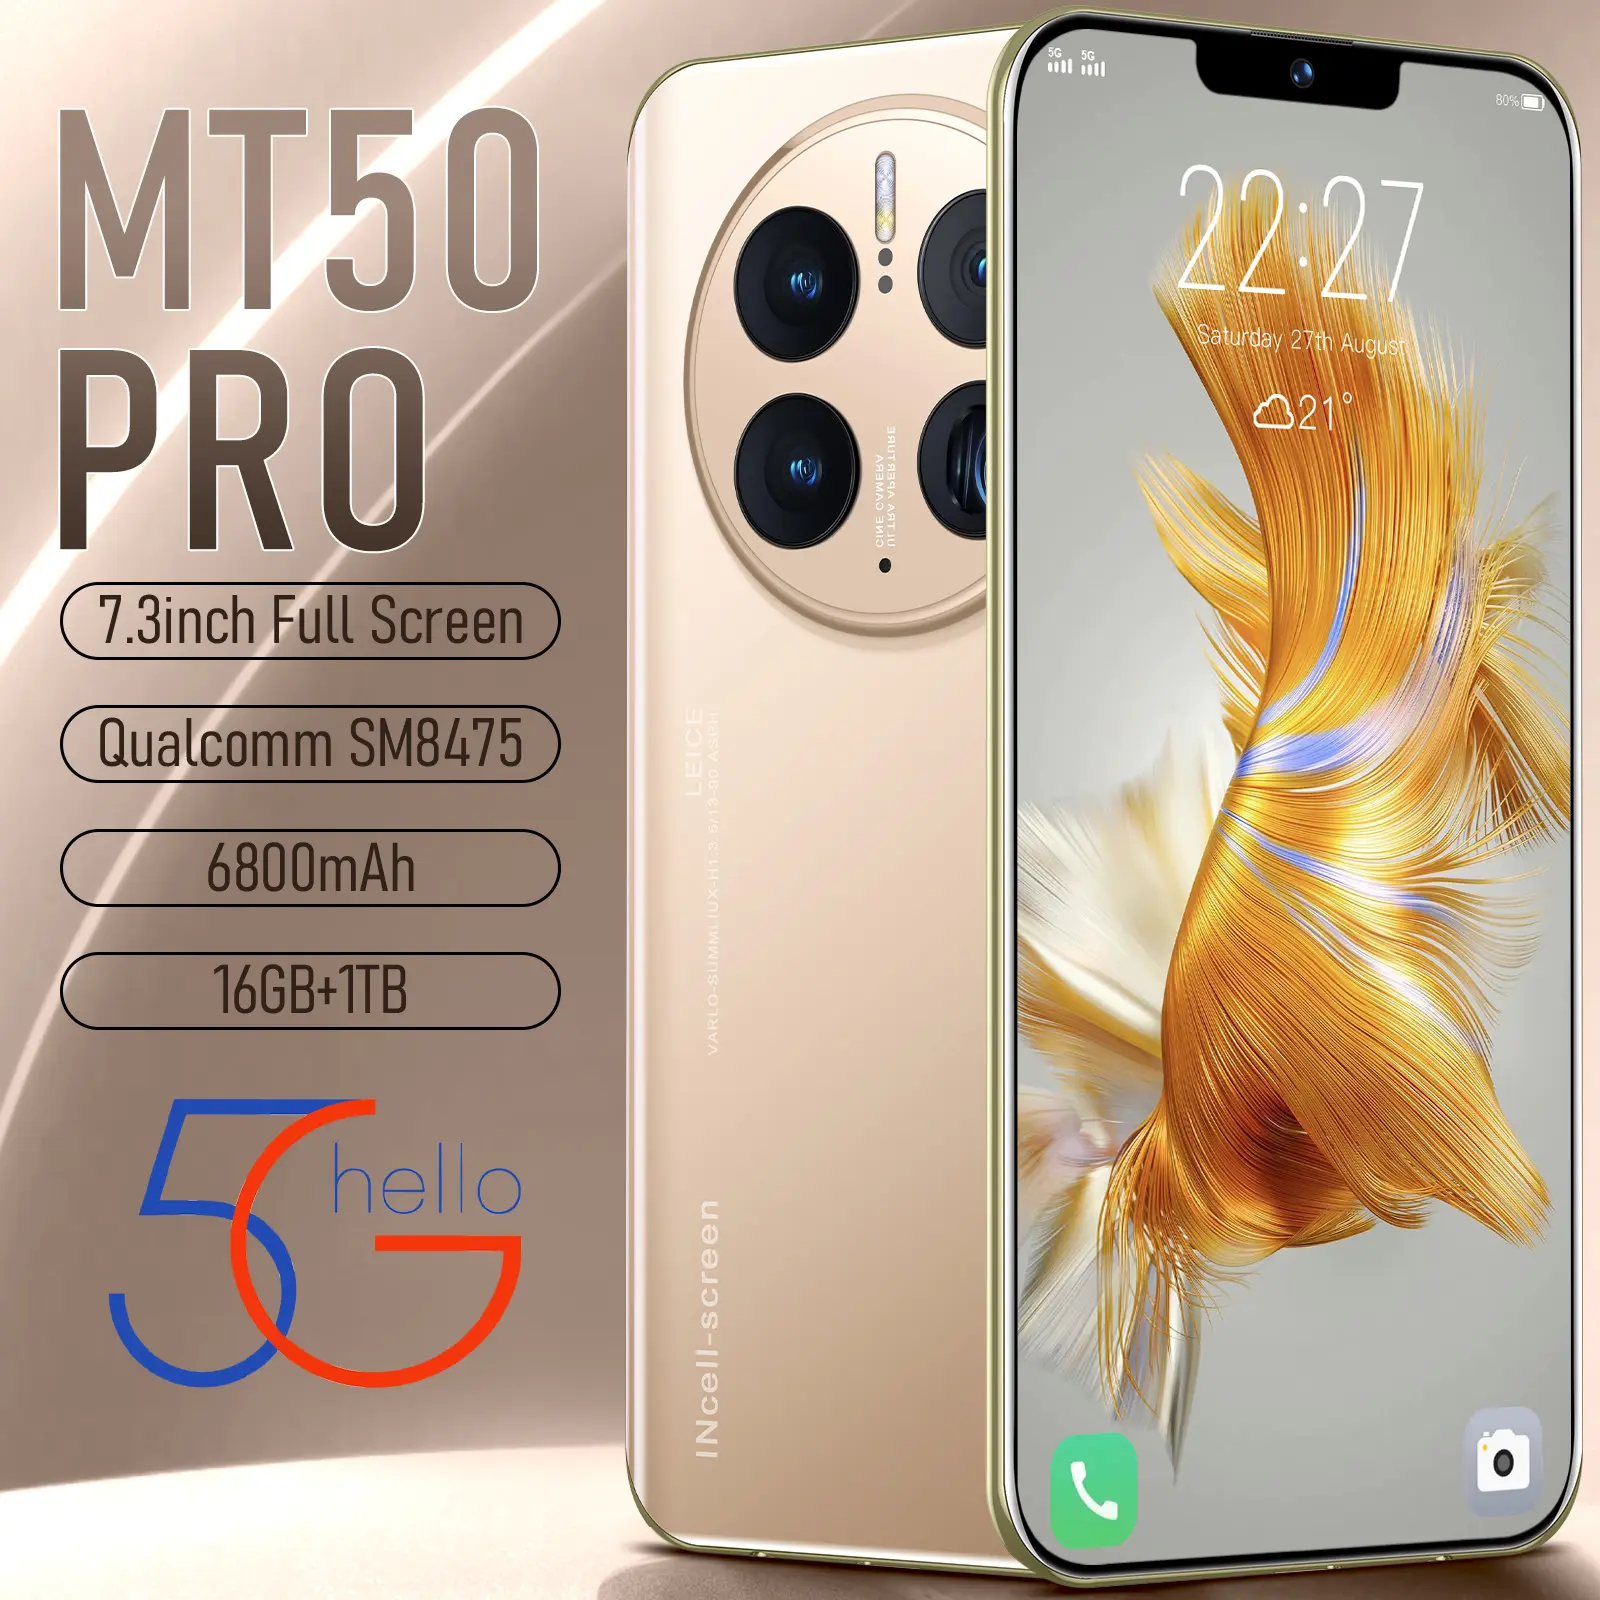 Cross border mobile phone MA 50 PRO 7.3 inch large screen smartphone 5 megapixel Android 8.1 (1+8